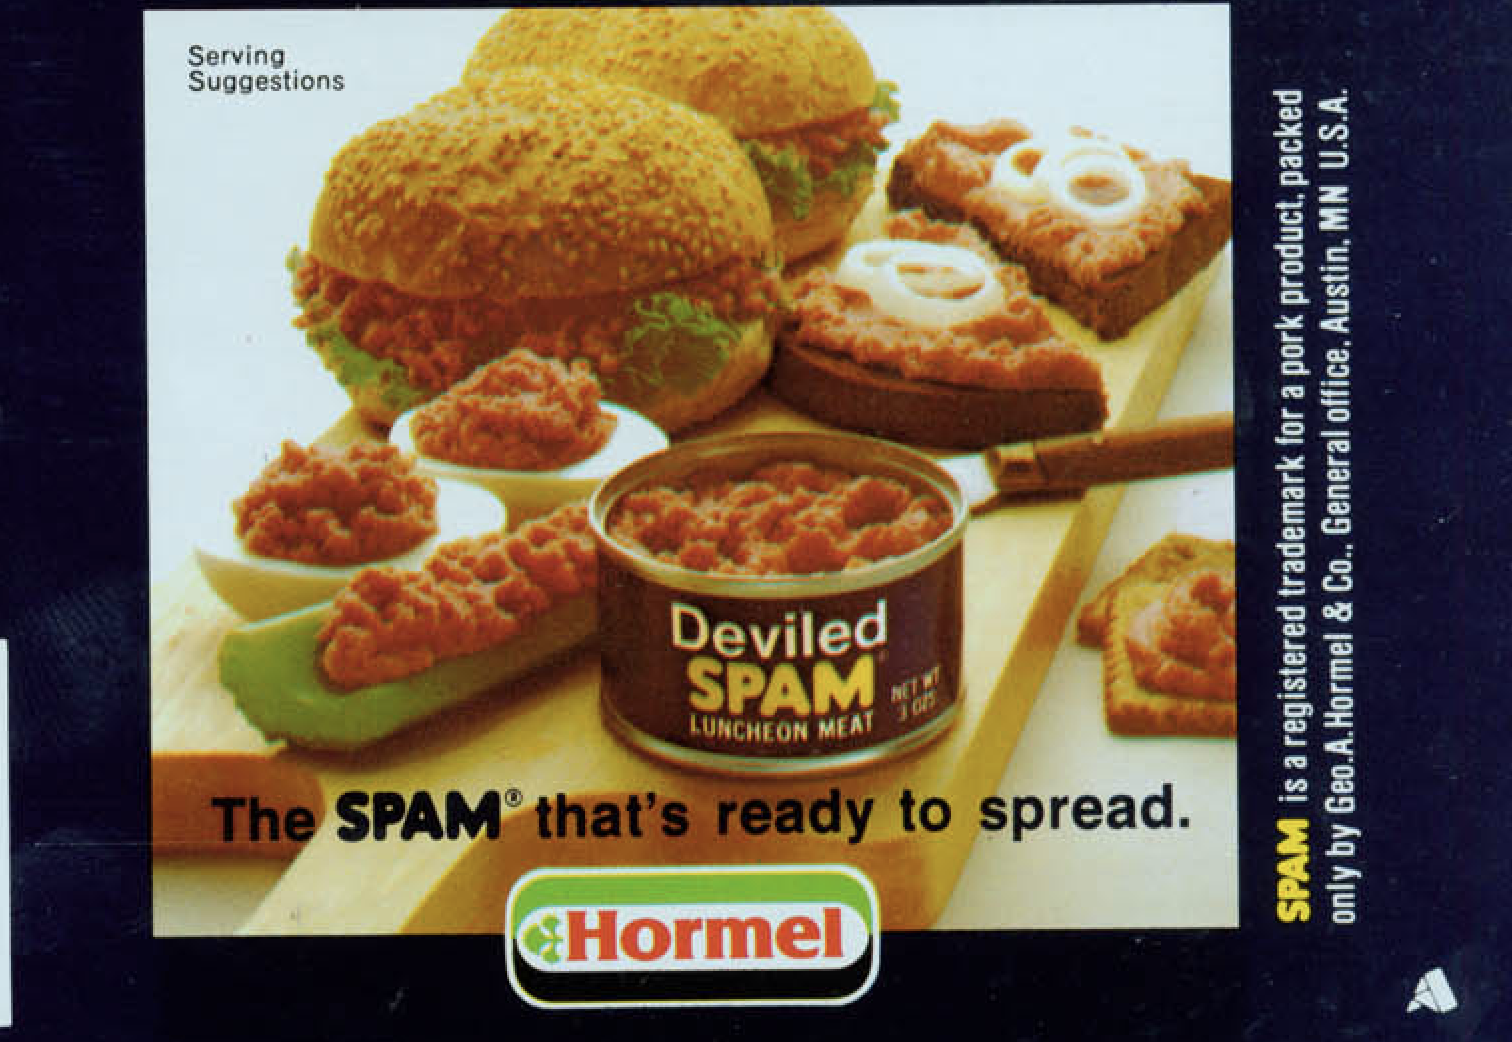 "Deviled Spam was actually a product for many, many years. The idea was to have a spread that was already mixed together that could be put on sandwiches or different things. Spreads were very big, but we don't have this item in production anymore."